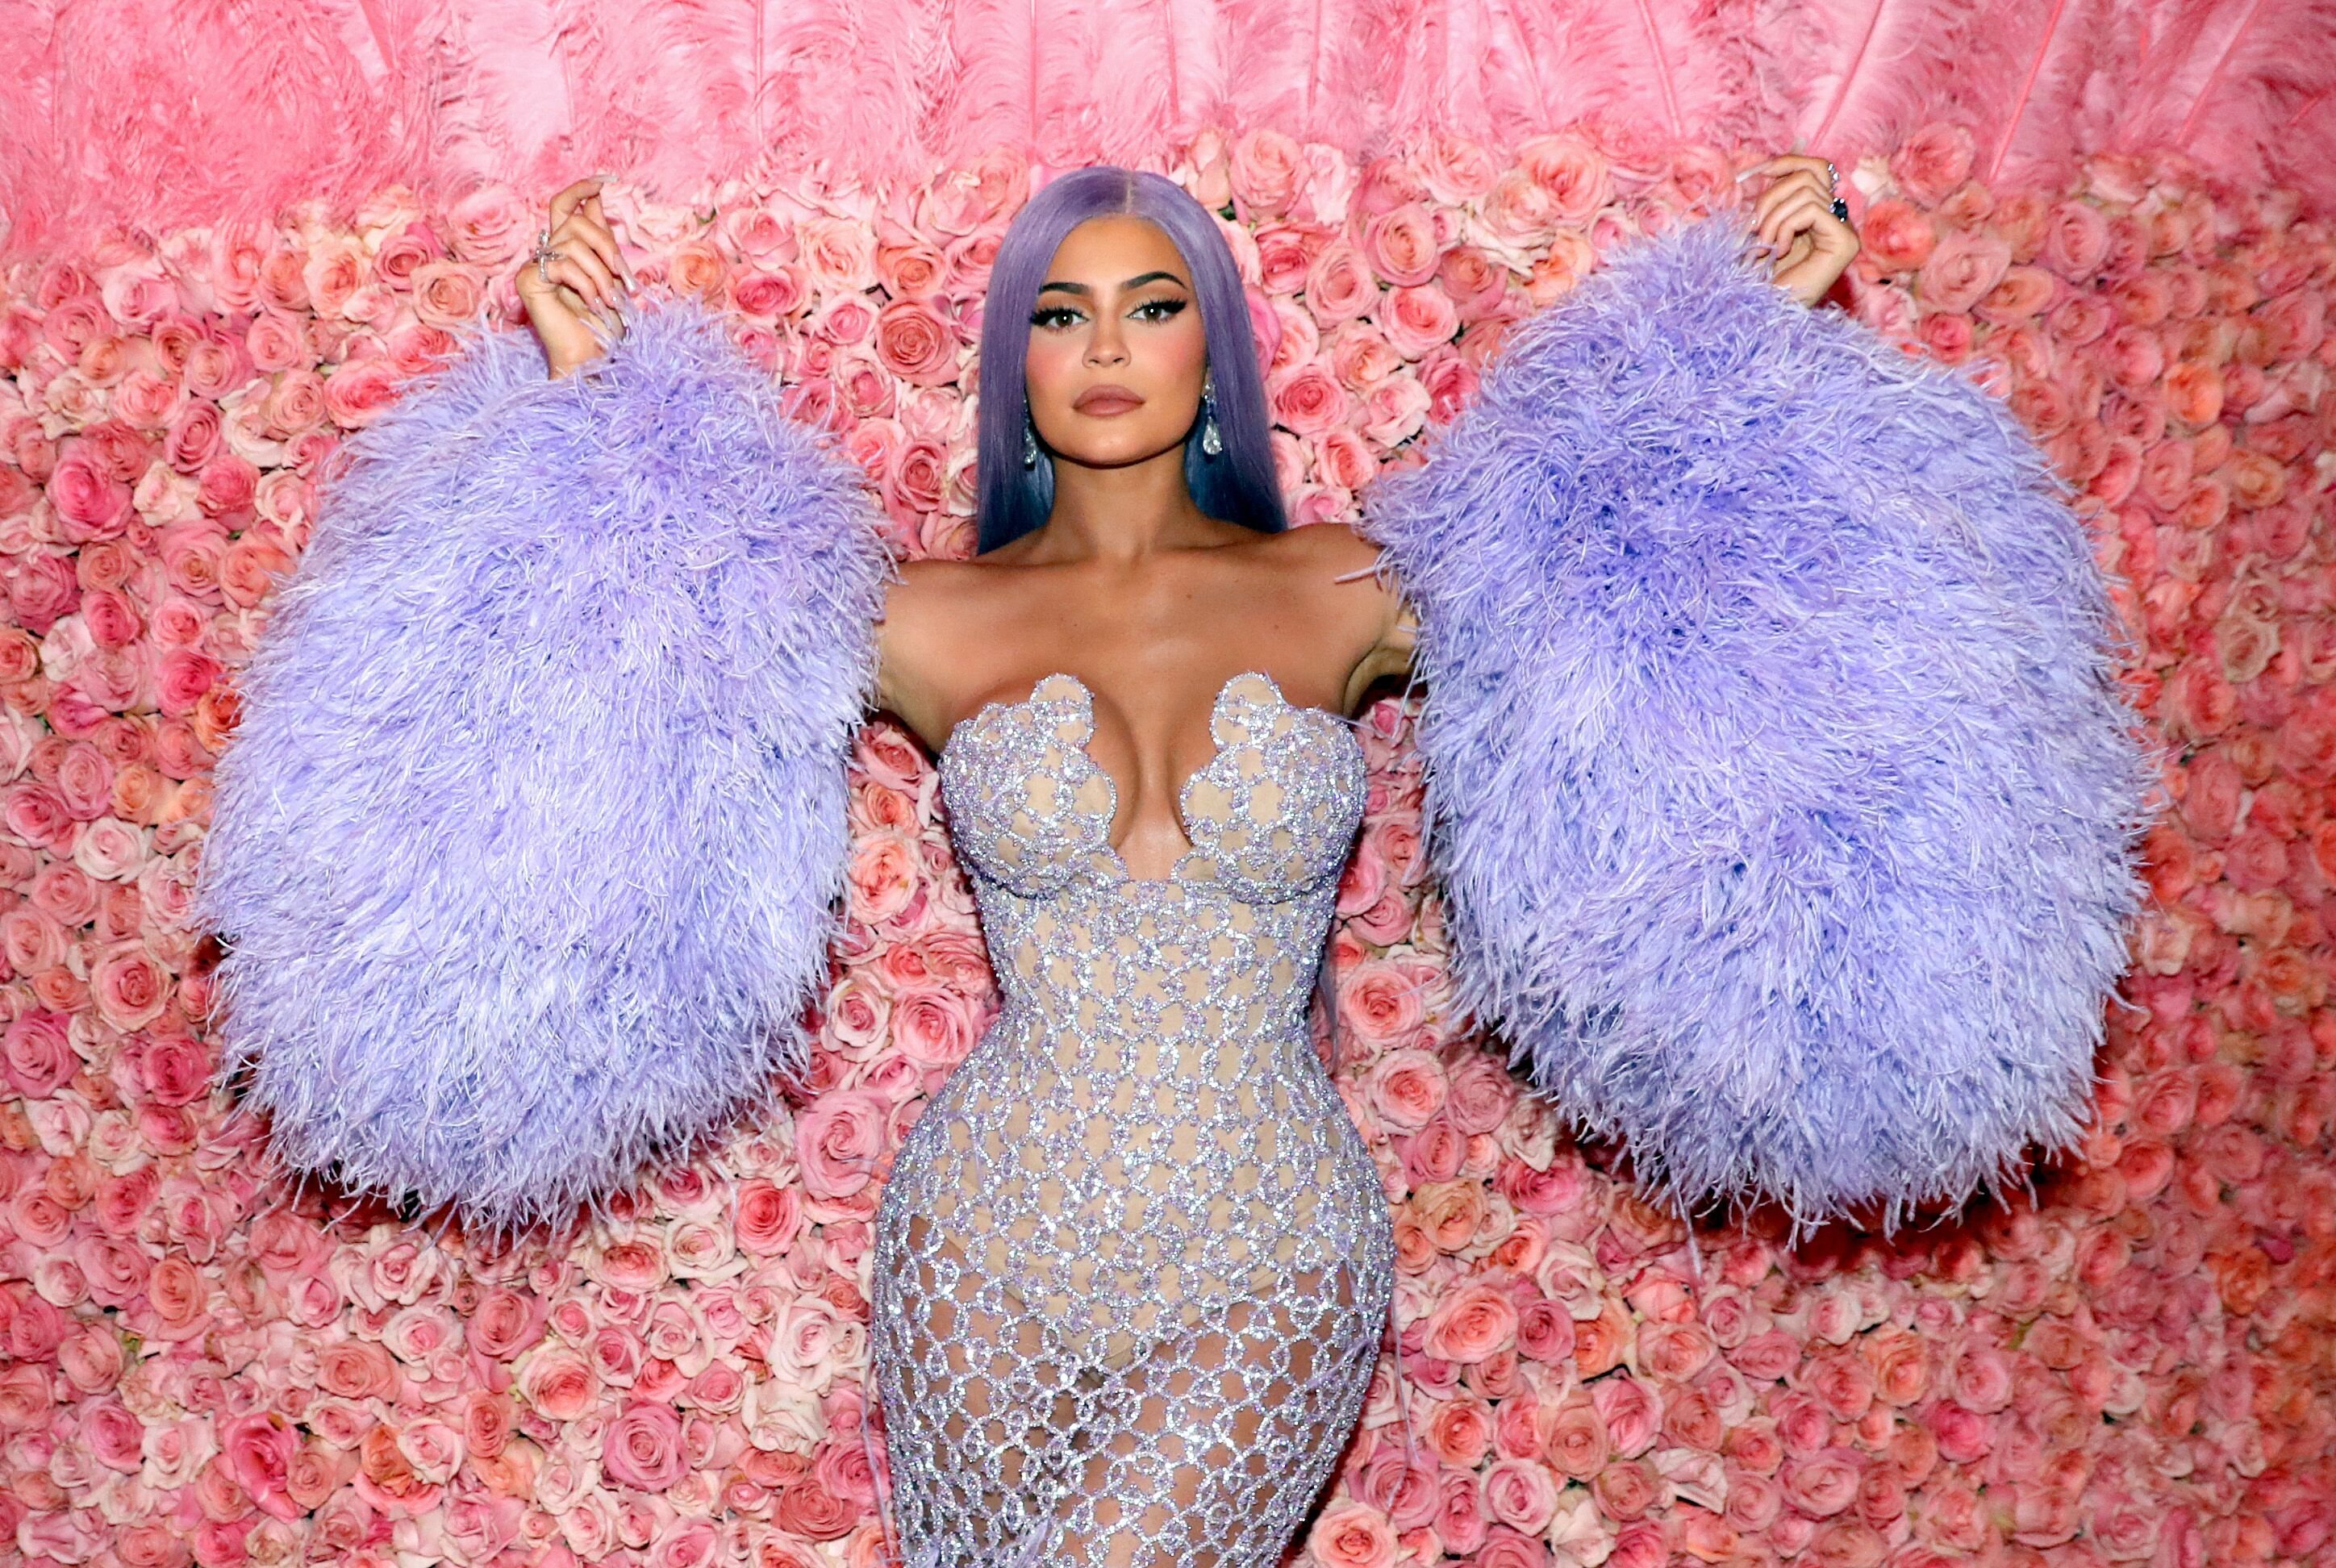 Kylie Jenner attends the 2019 MET Gala in New York | Photo: Getty Images